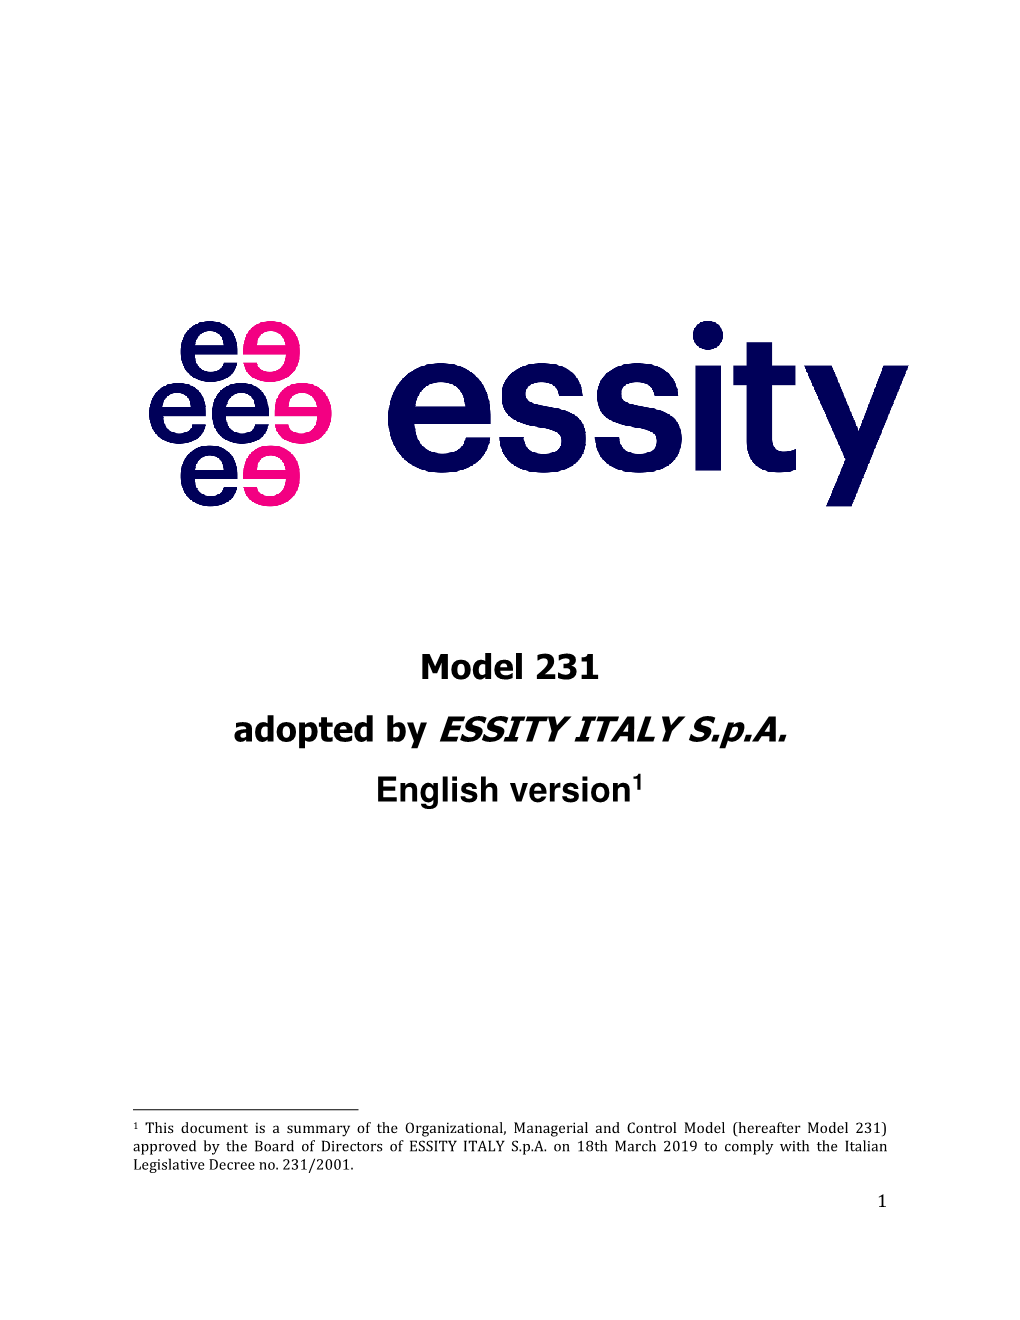 Model 231 Adopted by ESSITY ITALY Spa English Version1